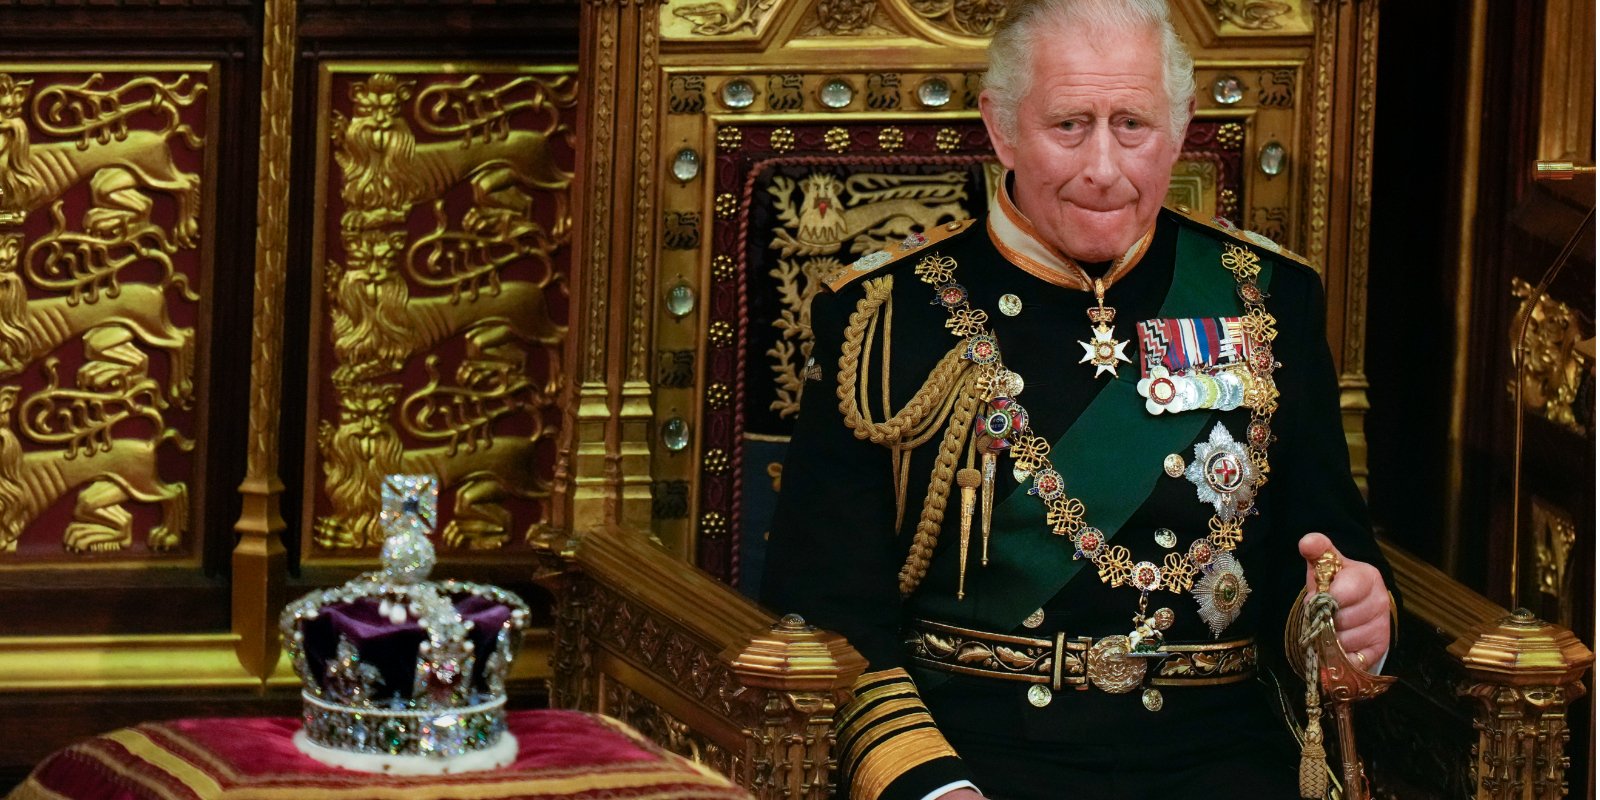 Royal Author Questions How King Charles III Could Be Coronated After His Divorce and Past Affair